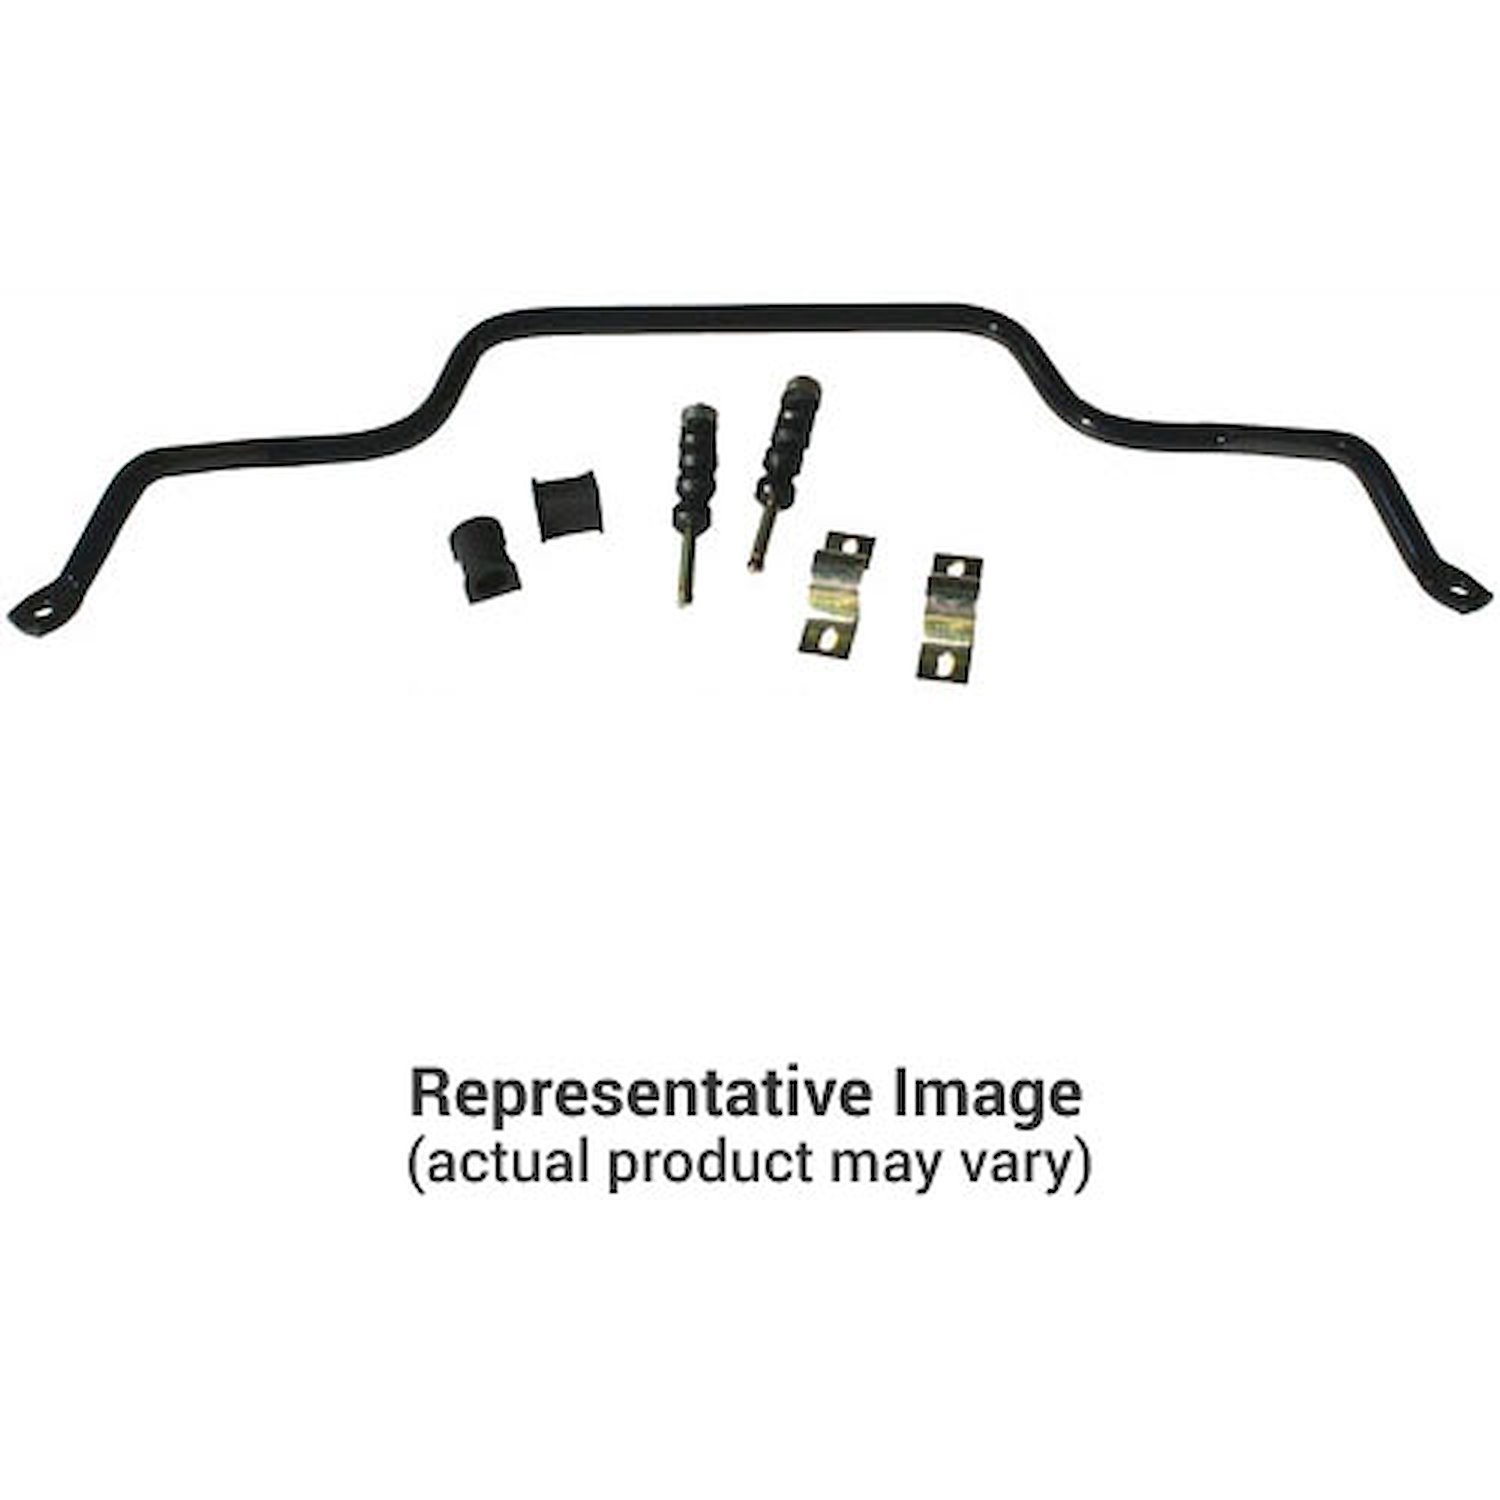 7/8" Front Sway Bar 1998-2000 Camry